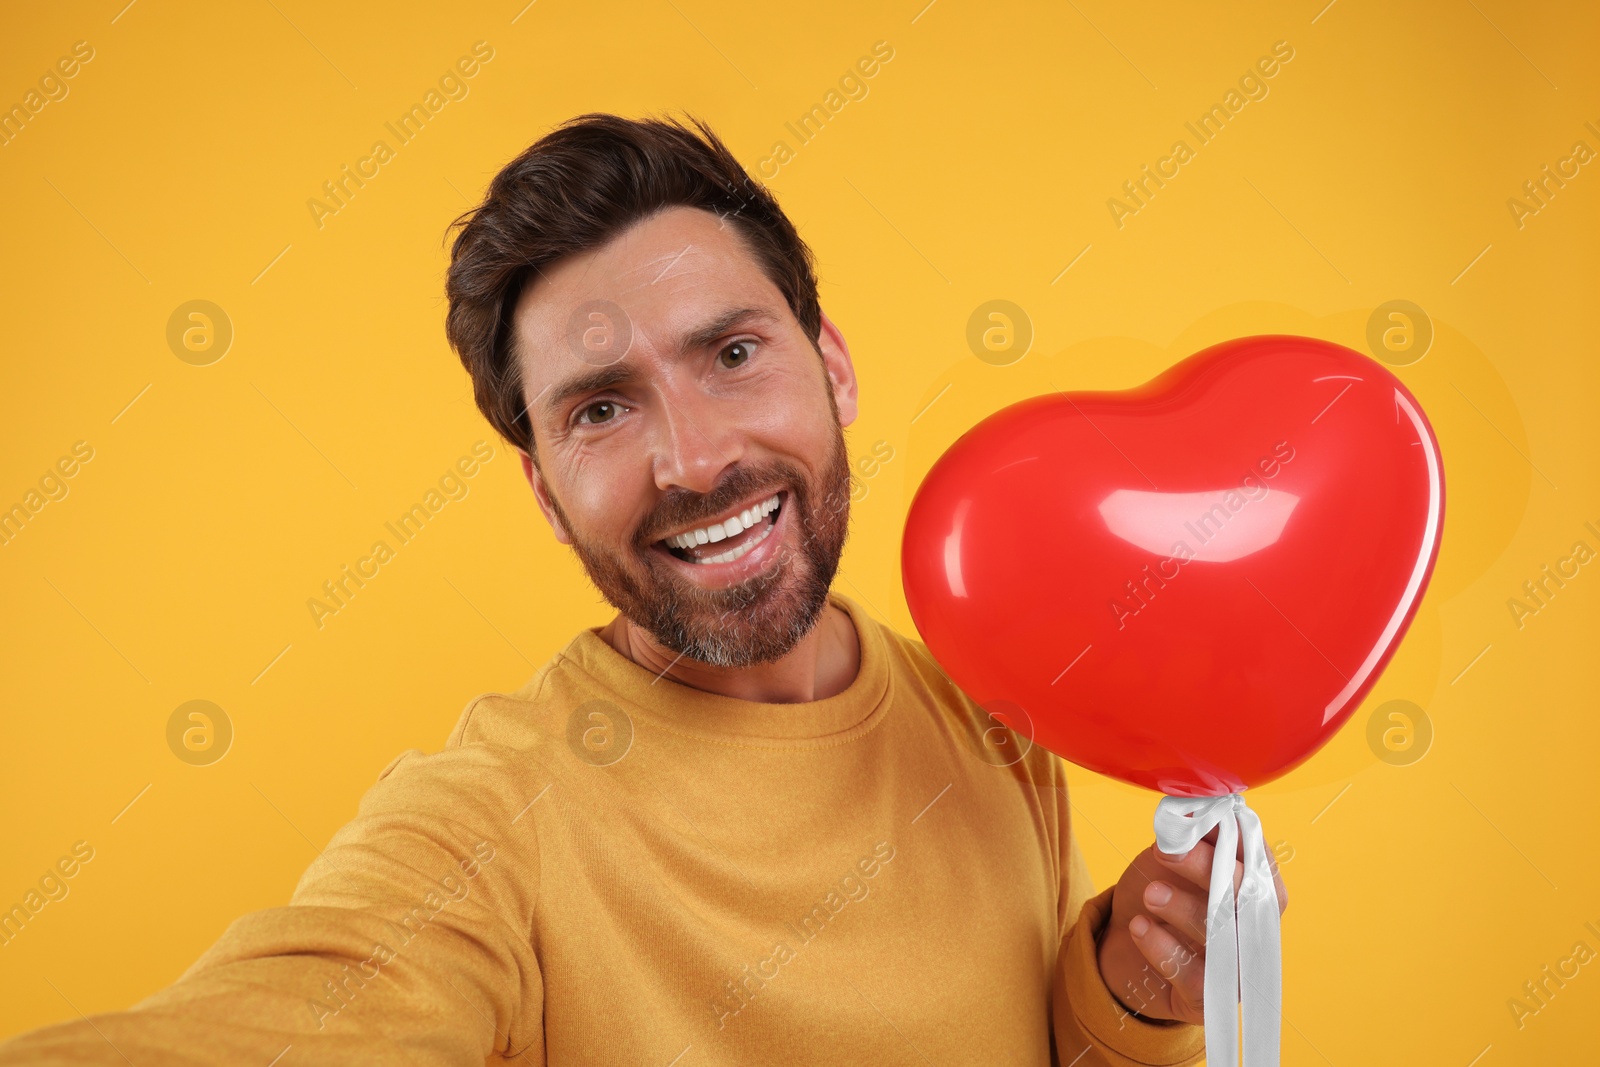 Photo of Happy man holding red heart shaped balloon and taking selfie on orange background